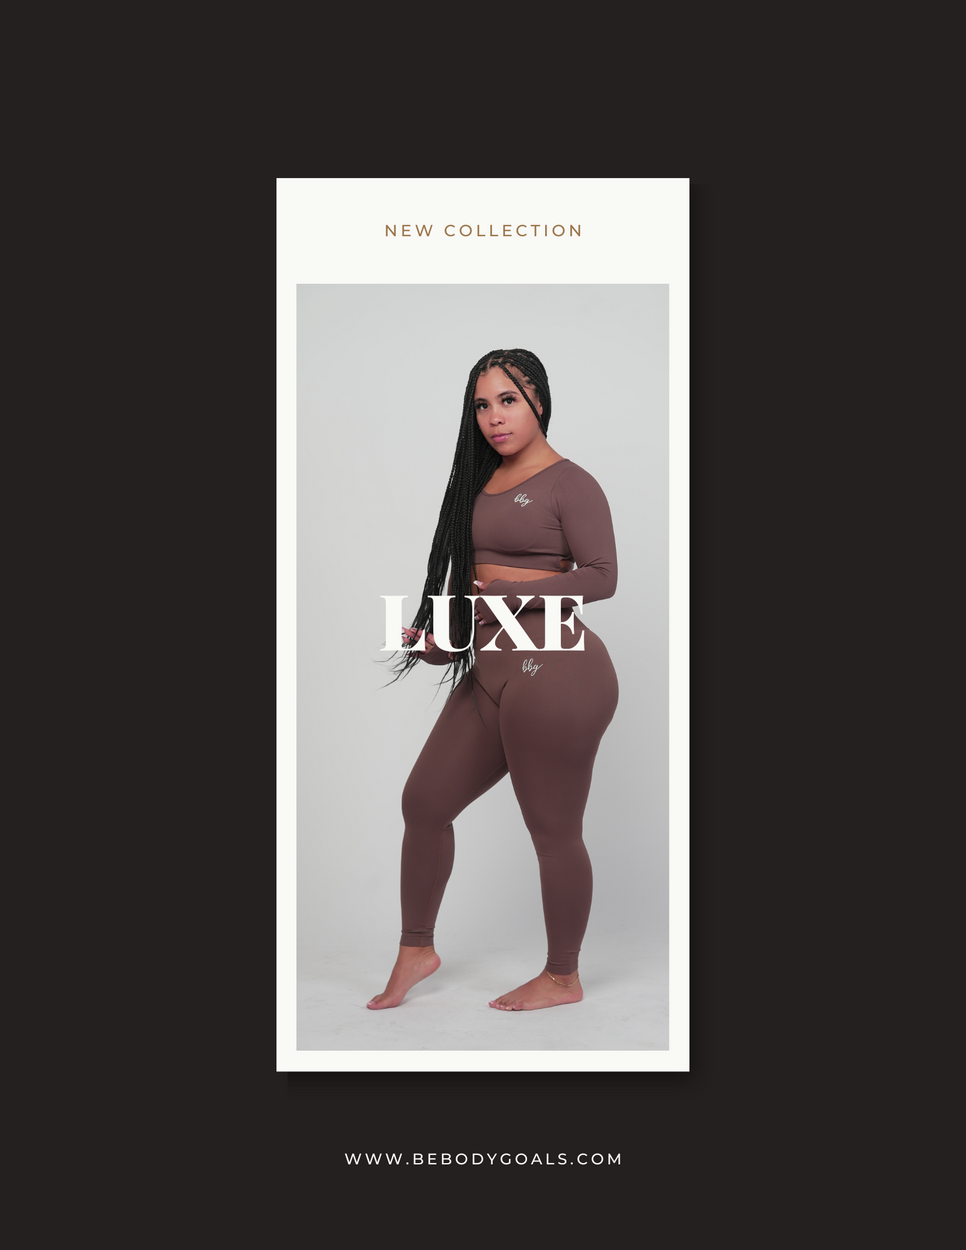 Luxe Collection